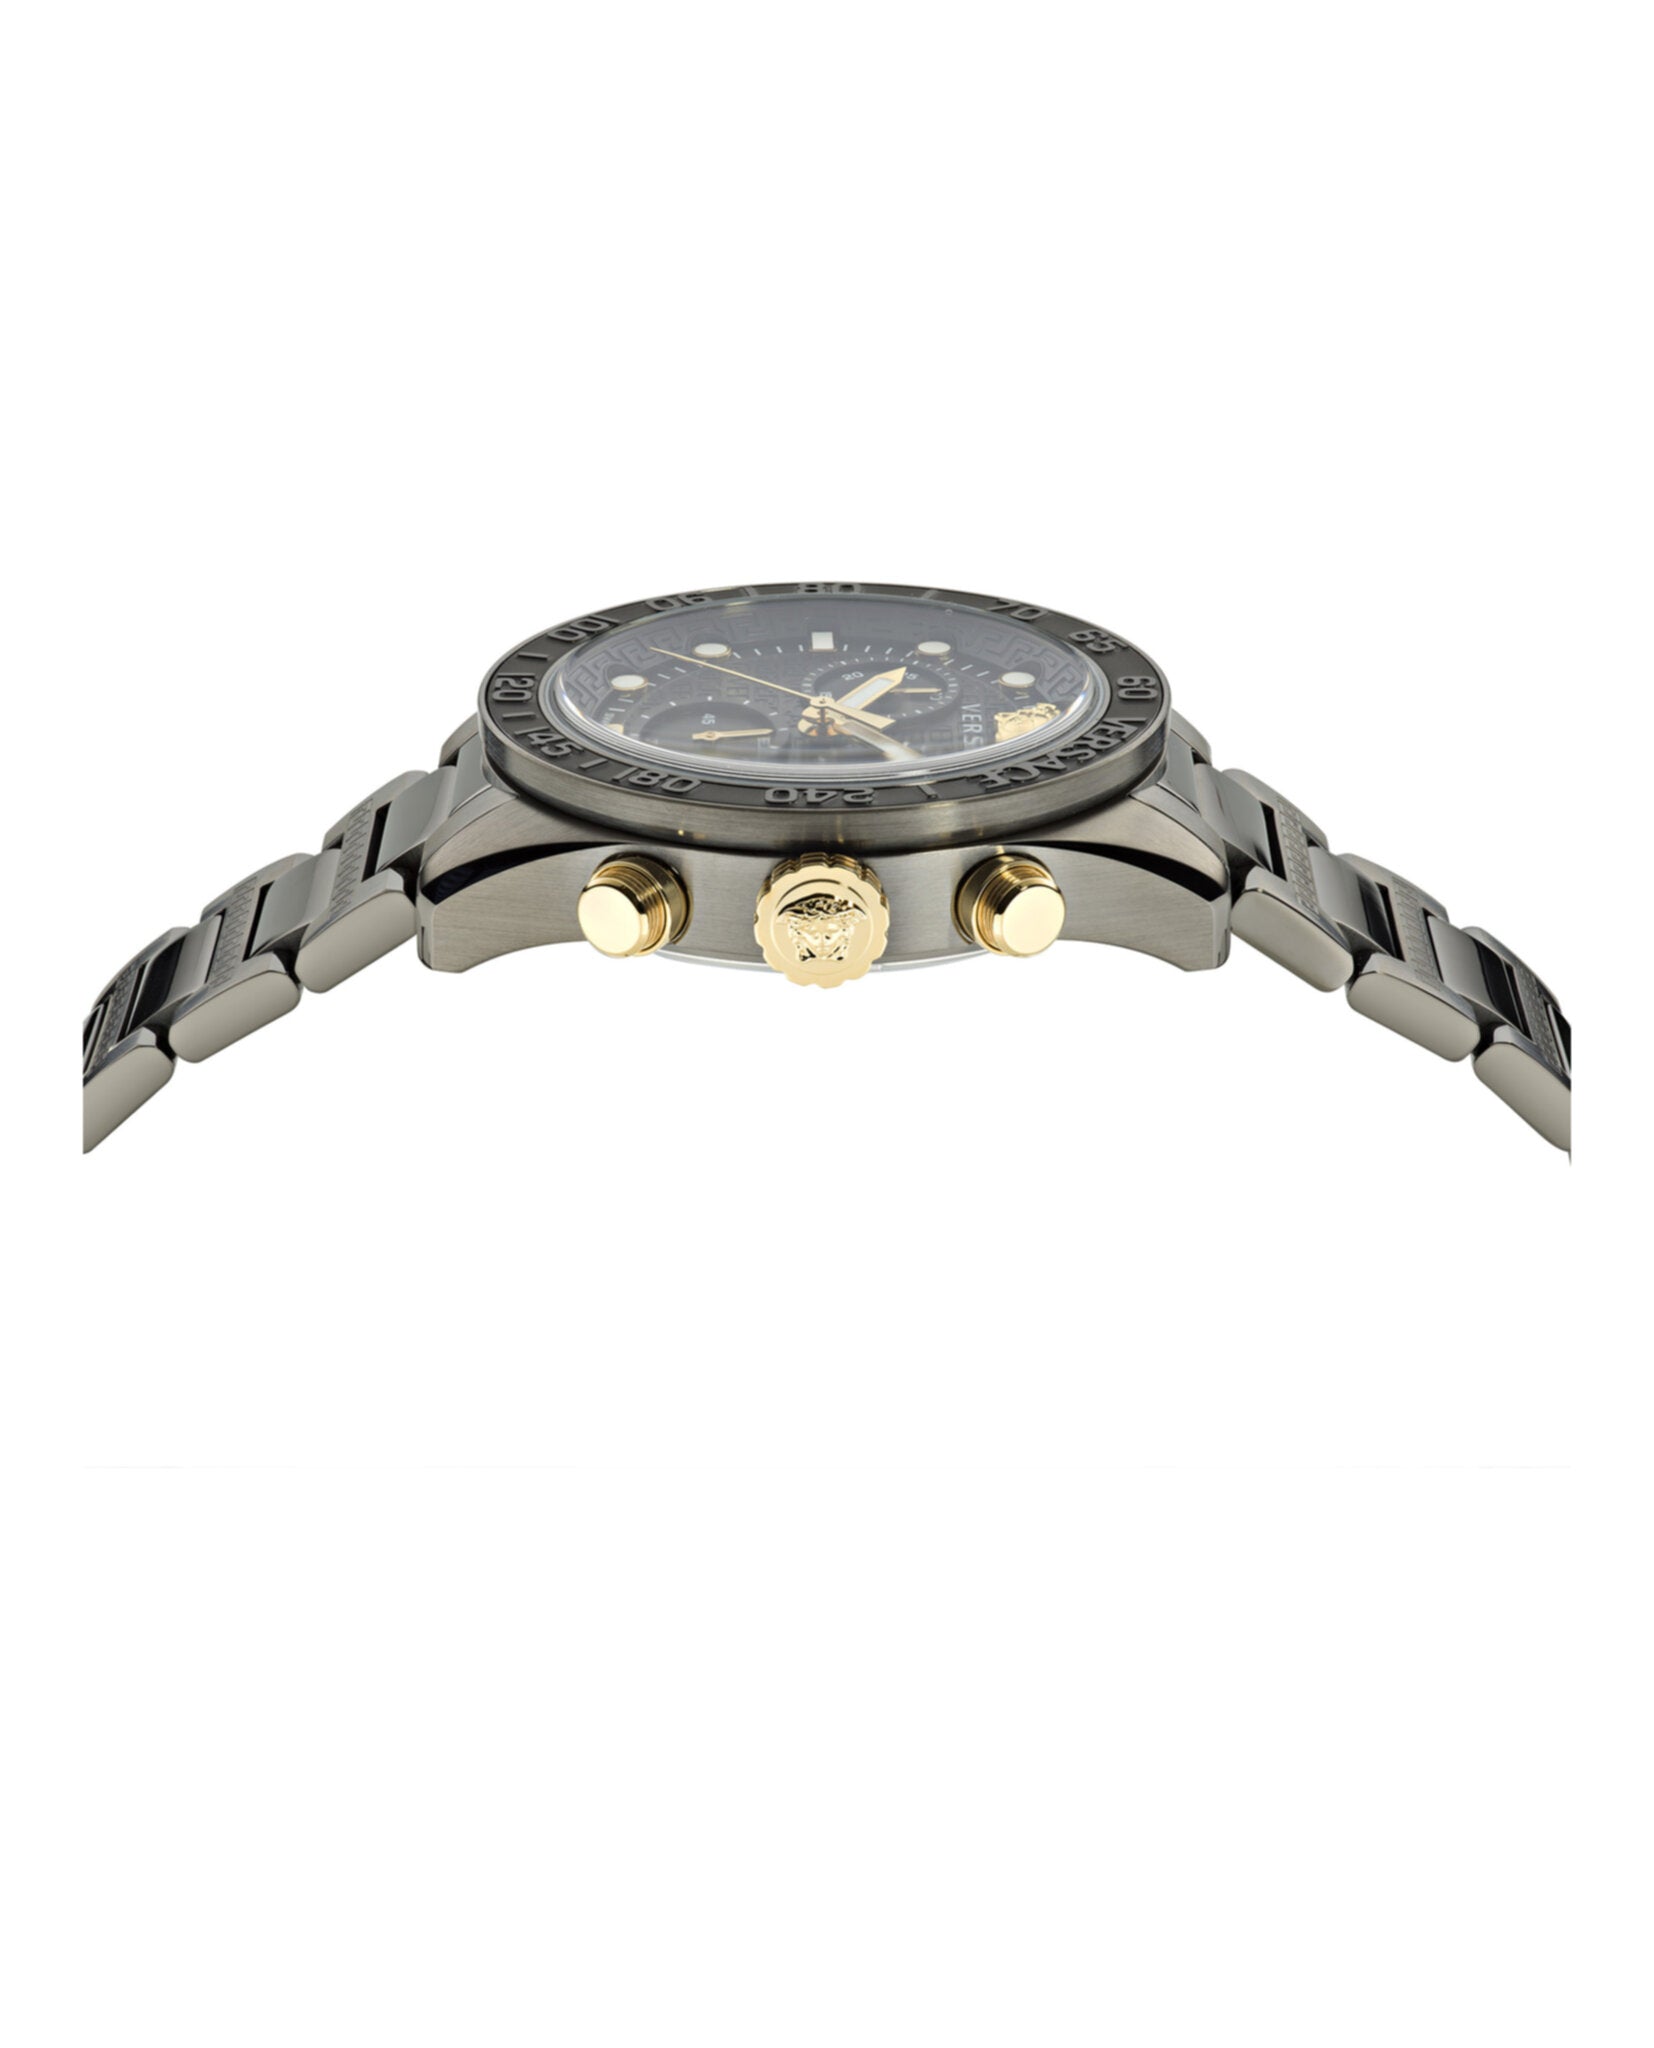 Versace Time Dome MadaLuxe Madaluxe | Mens Time Greca – Watches